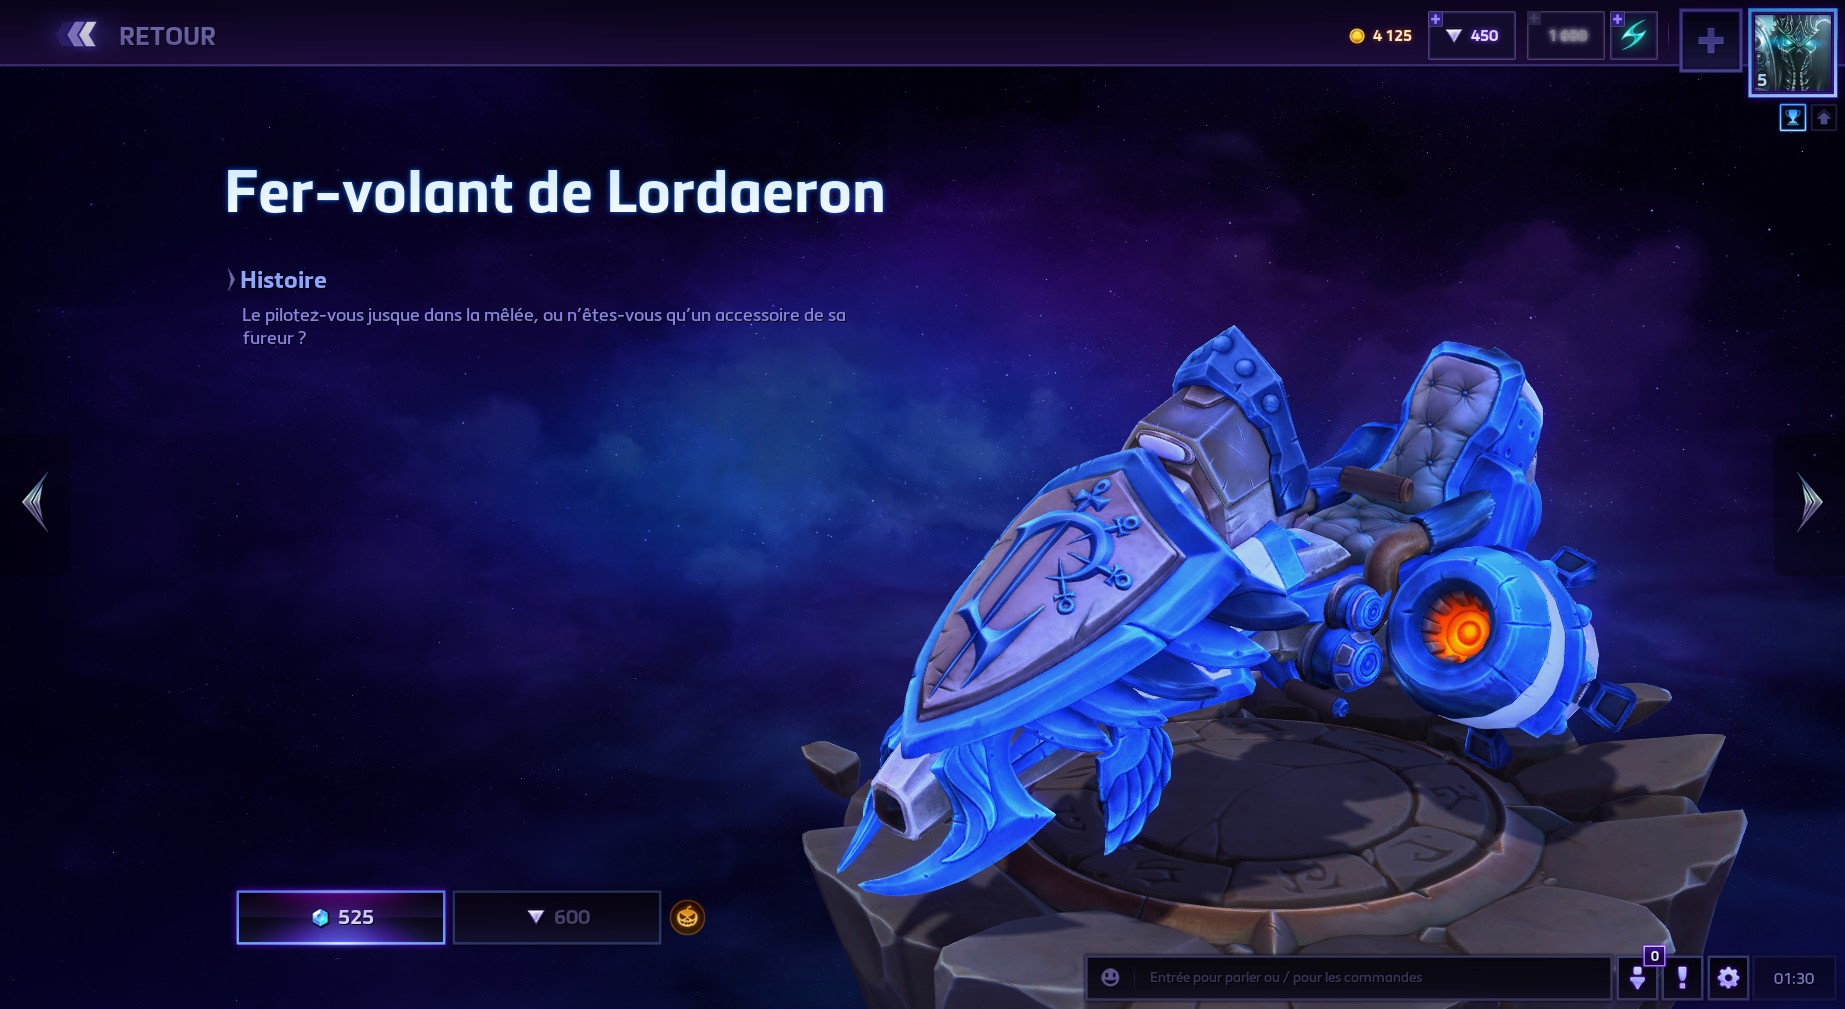 Heroes of the Storm: Heroes, gold, skins, mounts and more